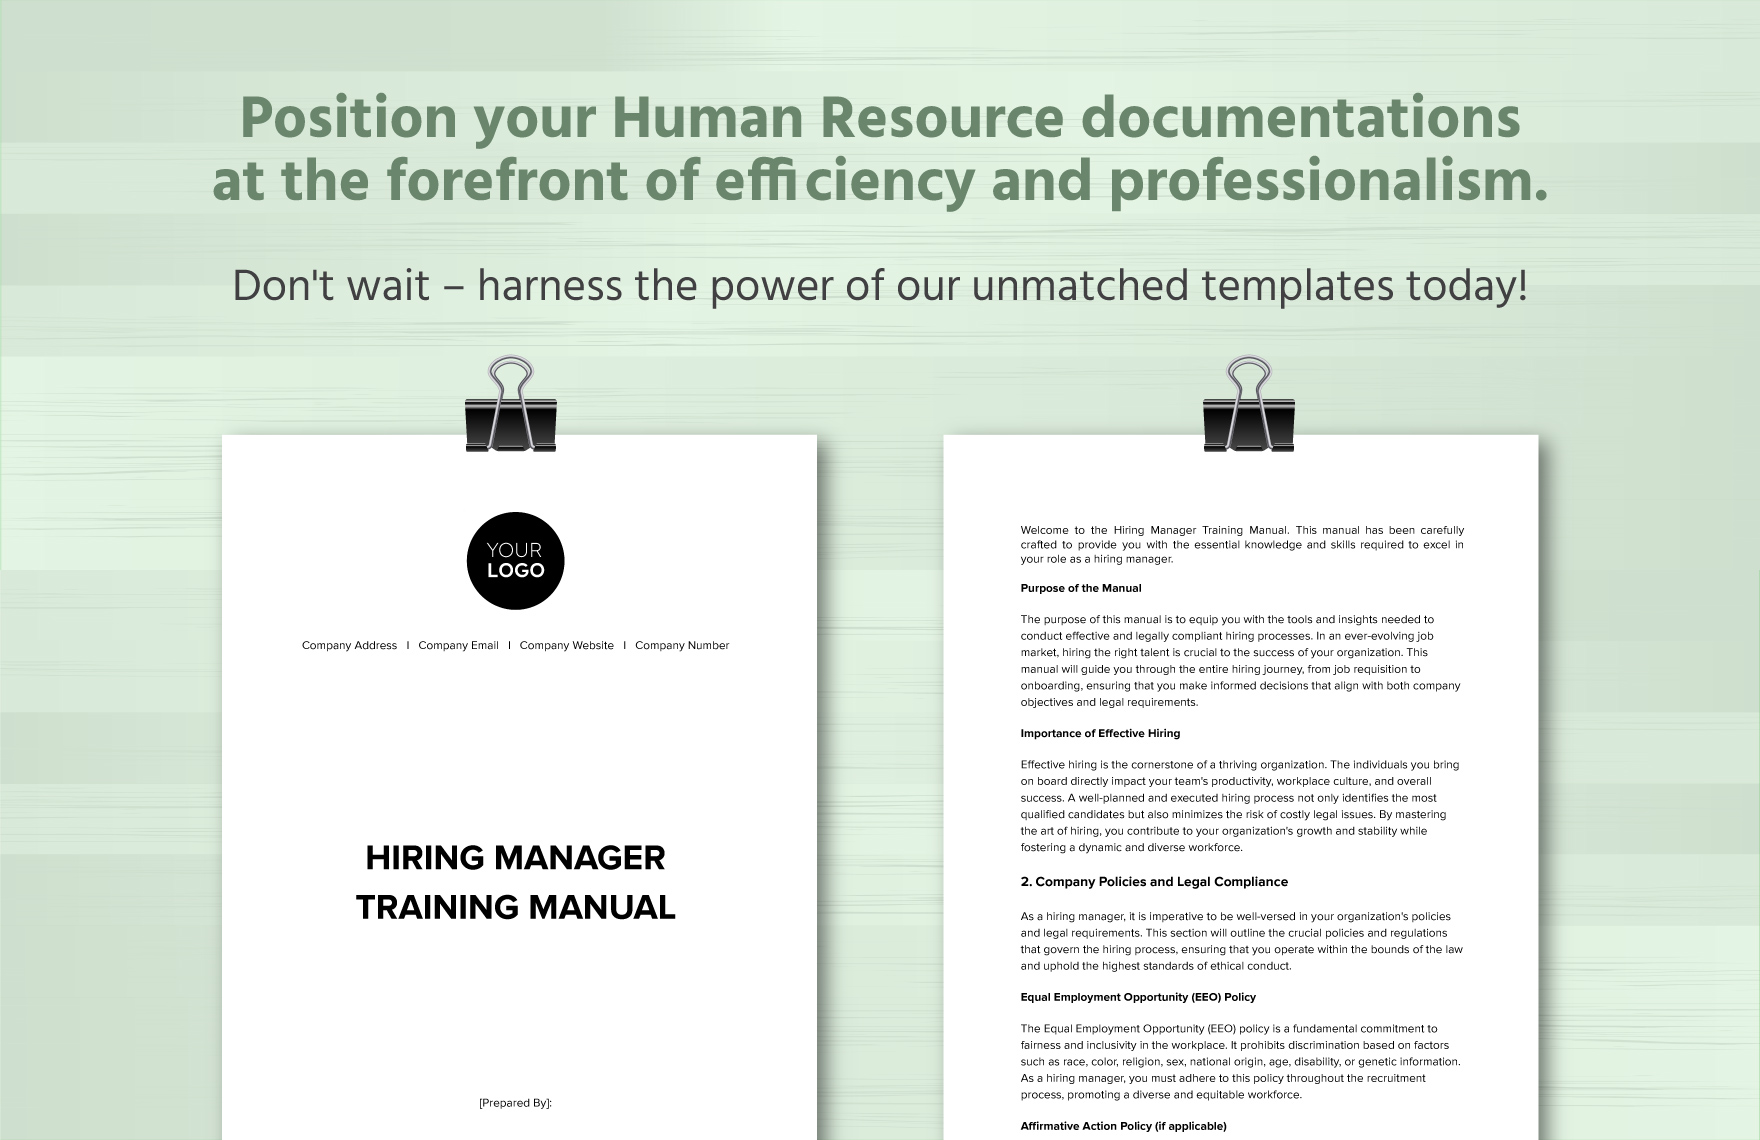 Hiring Manager Training Manual HR Template